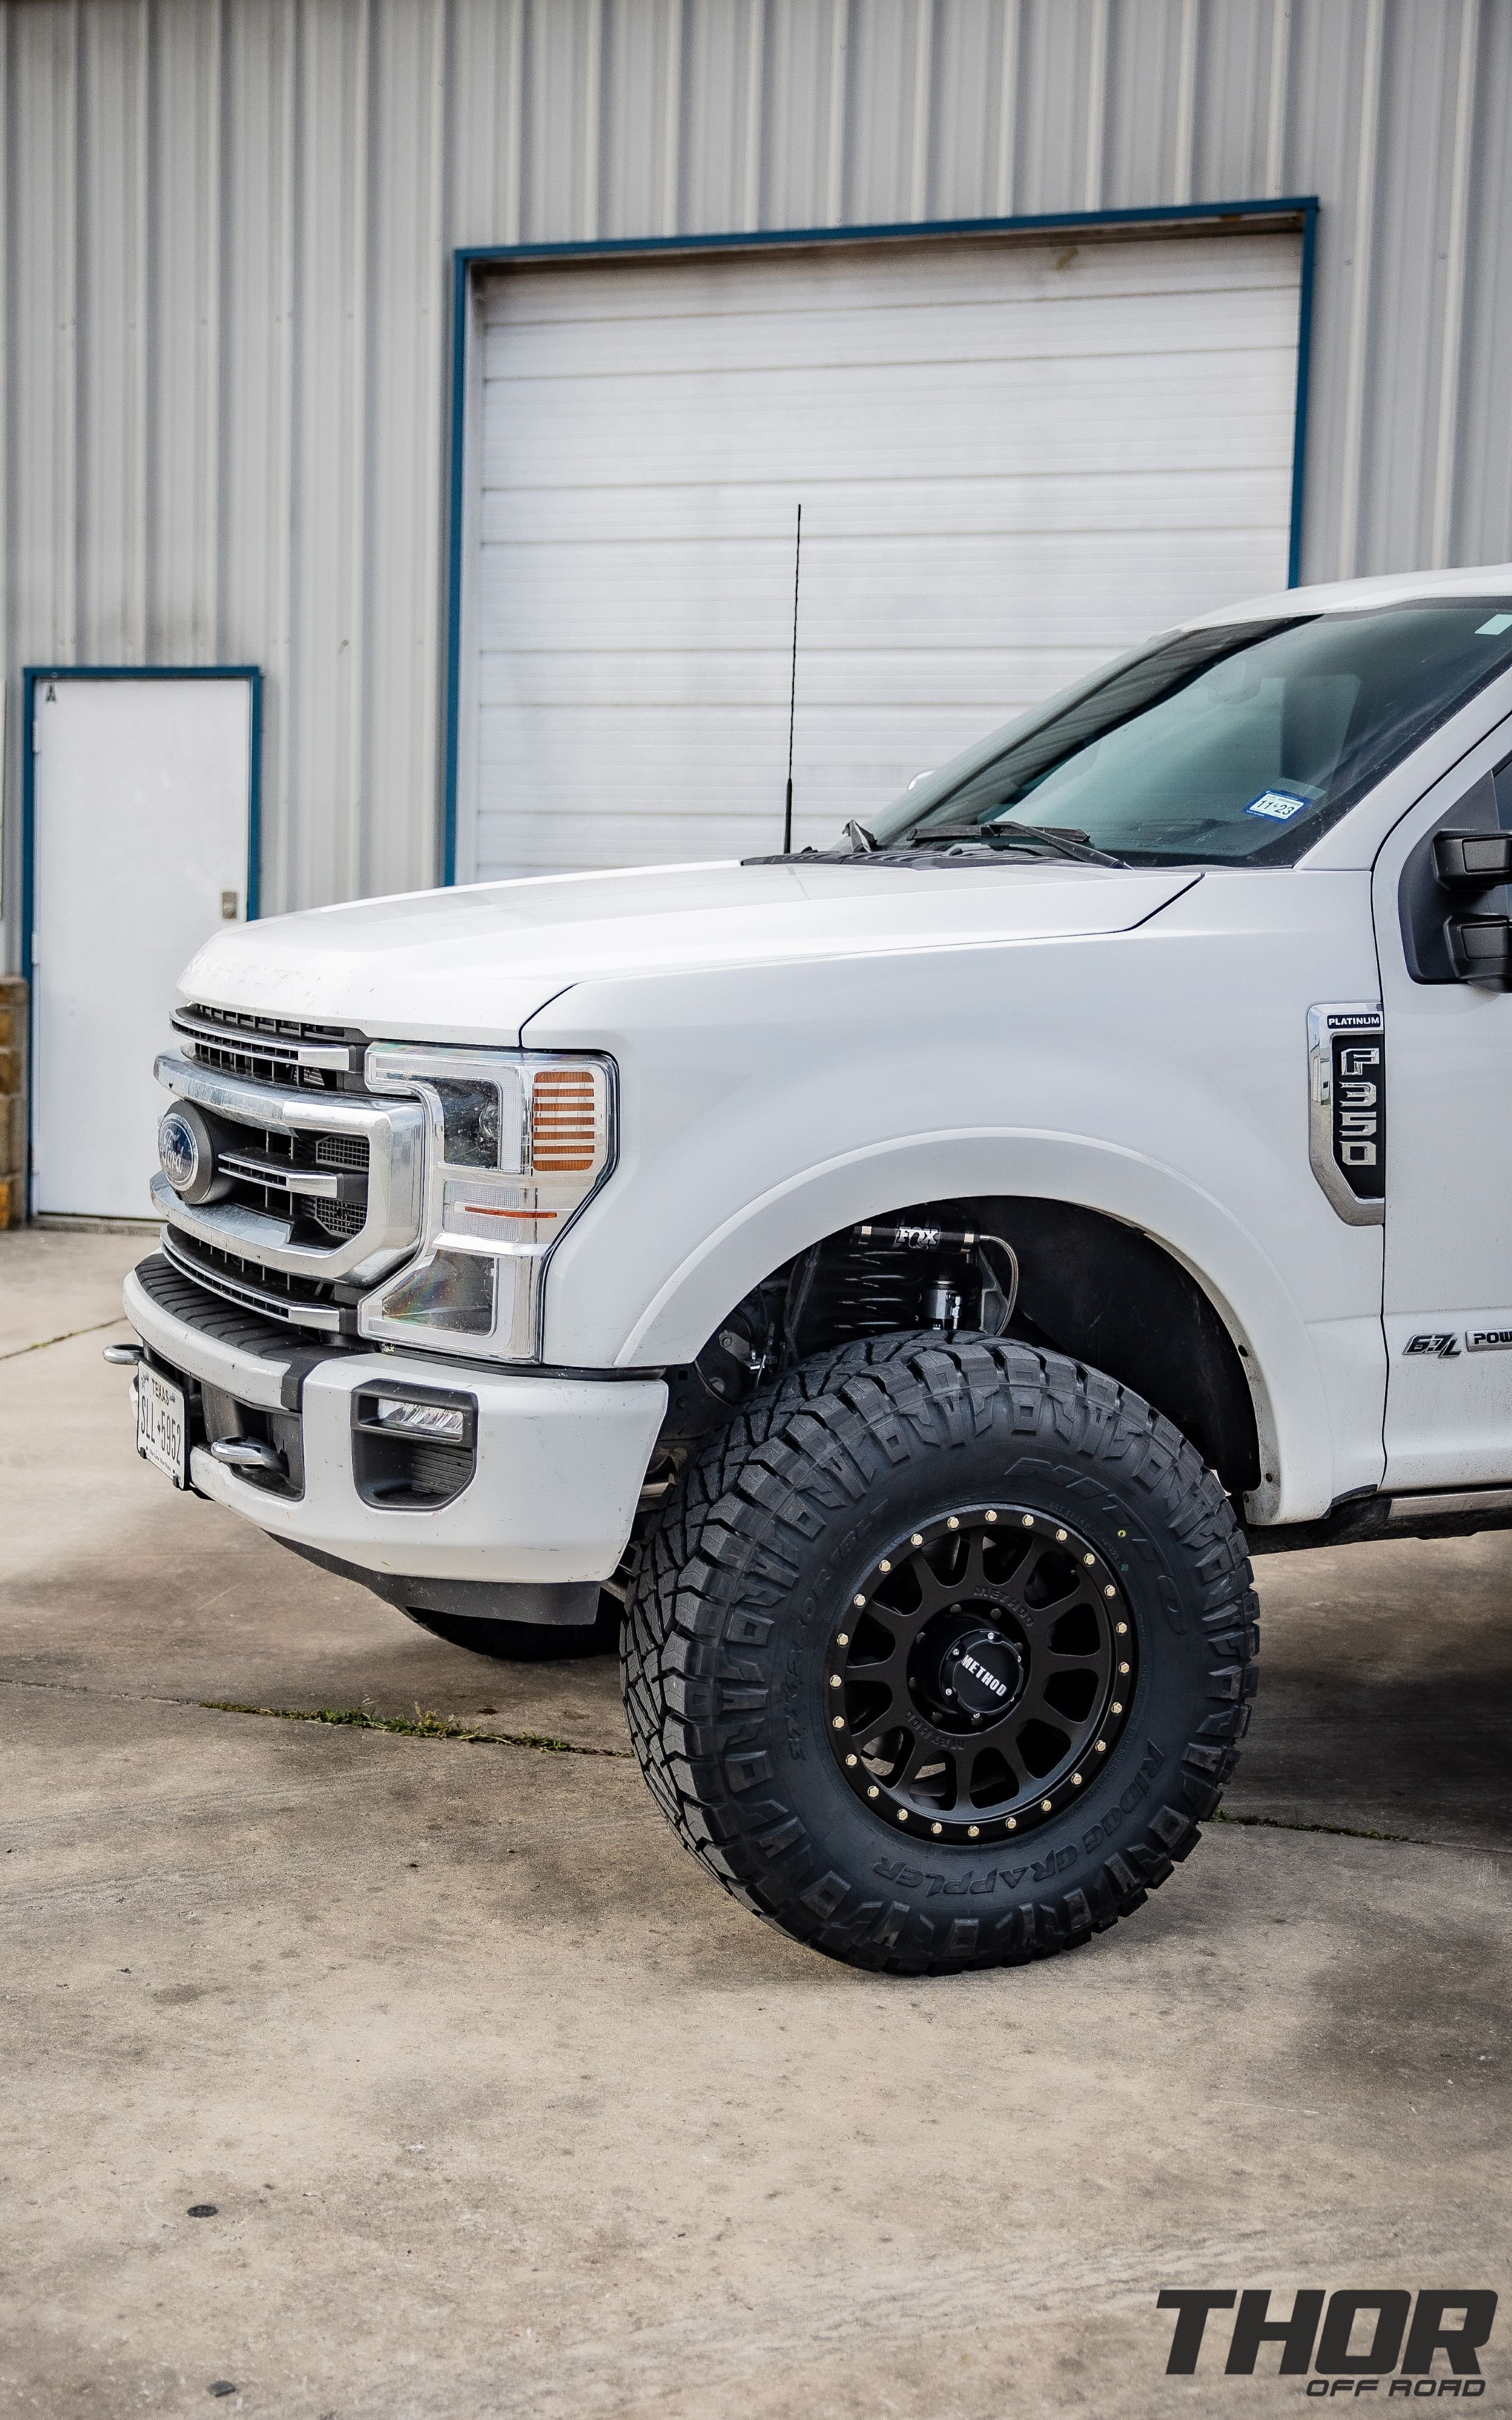 2022 Ford F-350 Super Duty Platinum in White with Carli Backcountry 3.5" Suspension Kit, Carli High Mount Steering Stabilizer, Carli Torsion Sway Bar, Method MR704 17x9" Bead Grip Wheels, 37x12.50R17 Toyo Open Country A/T III Tires